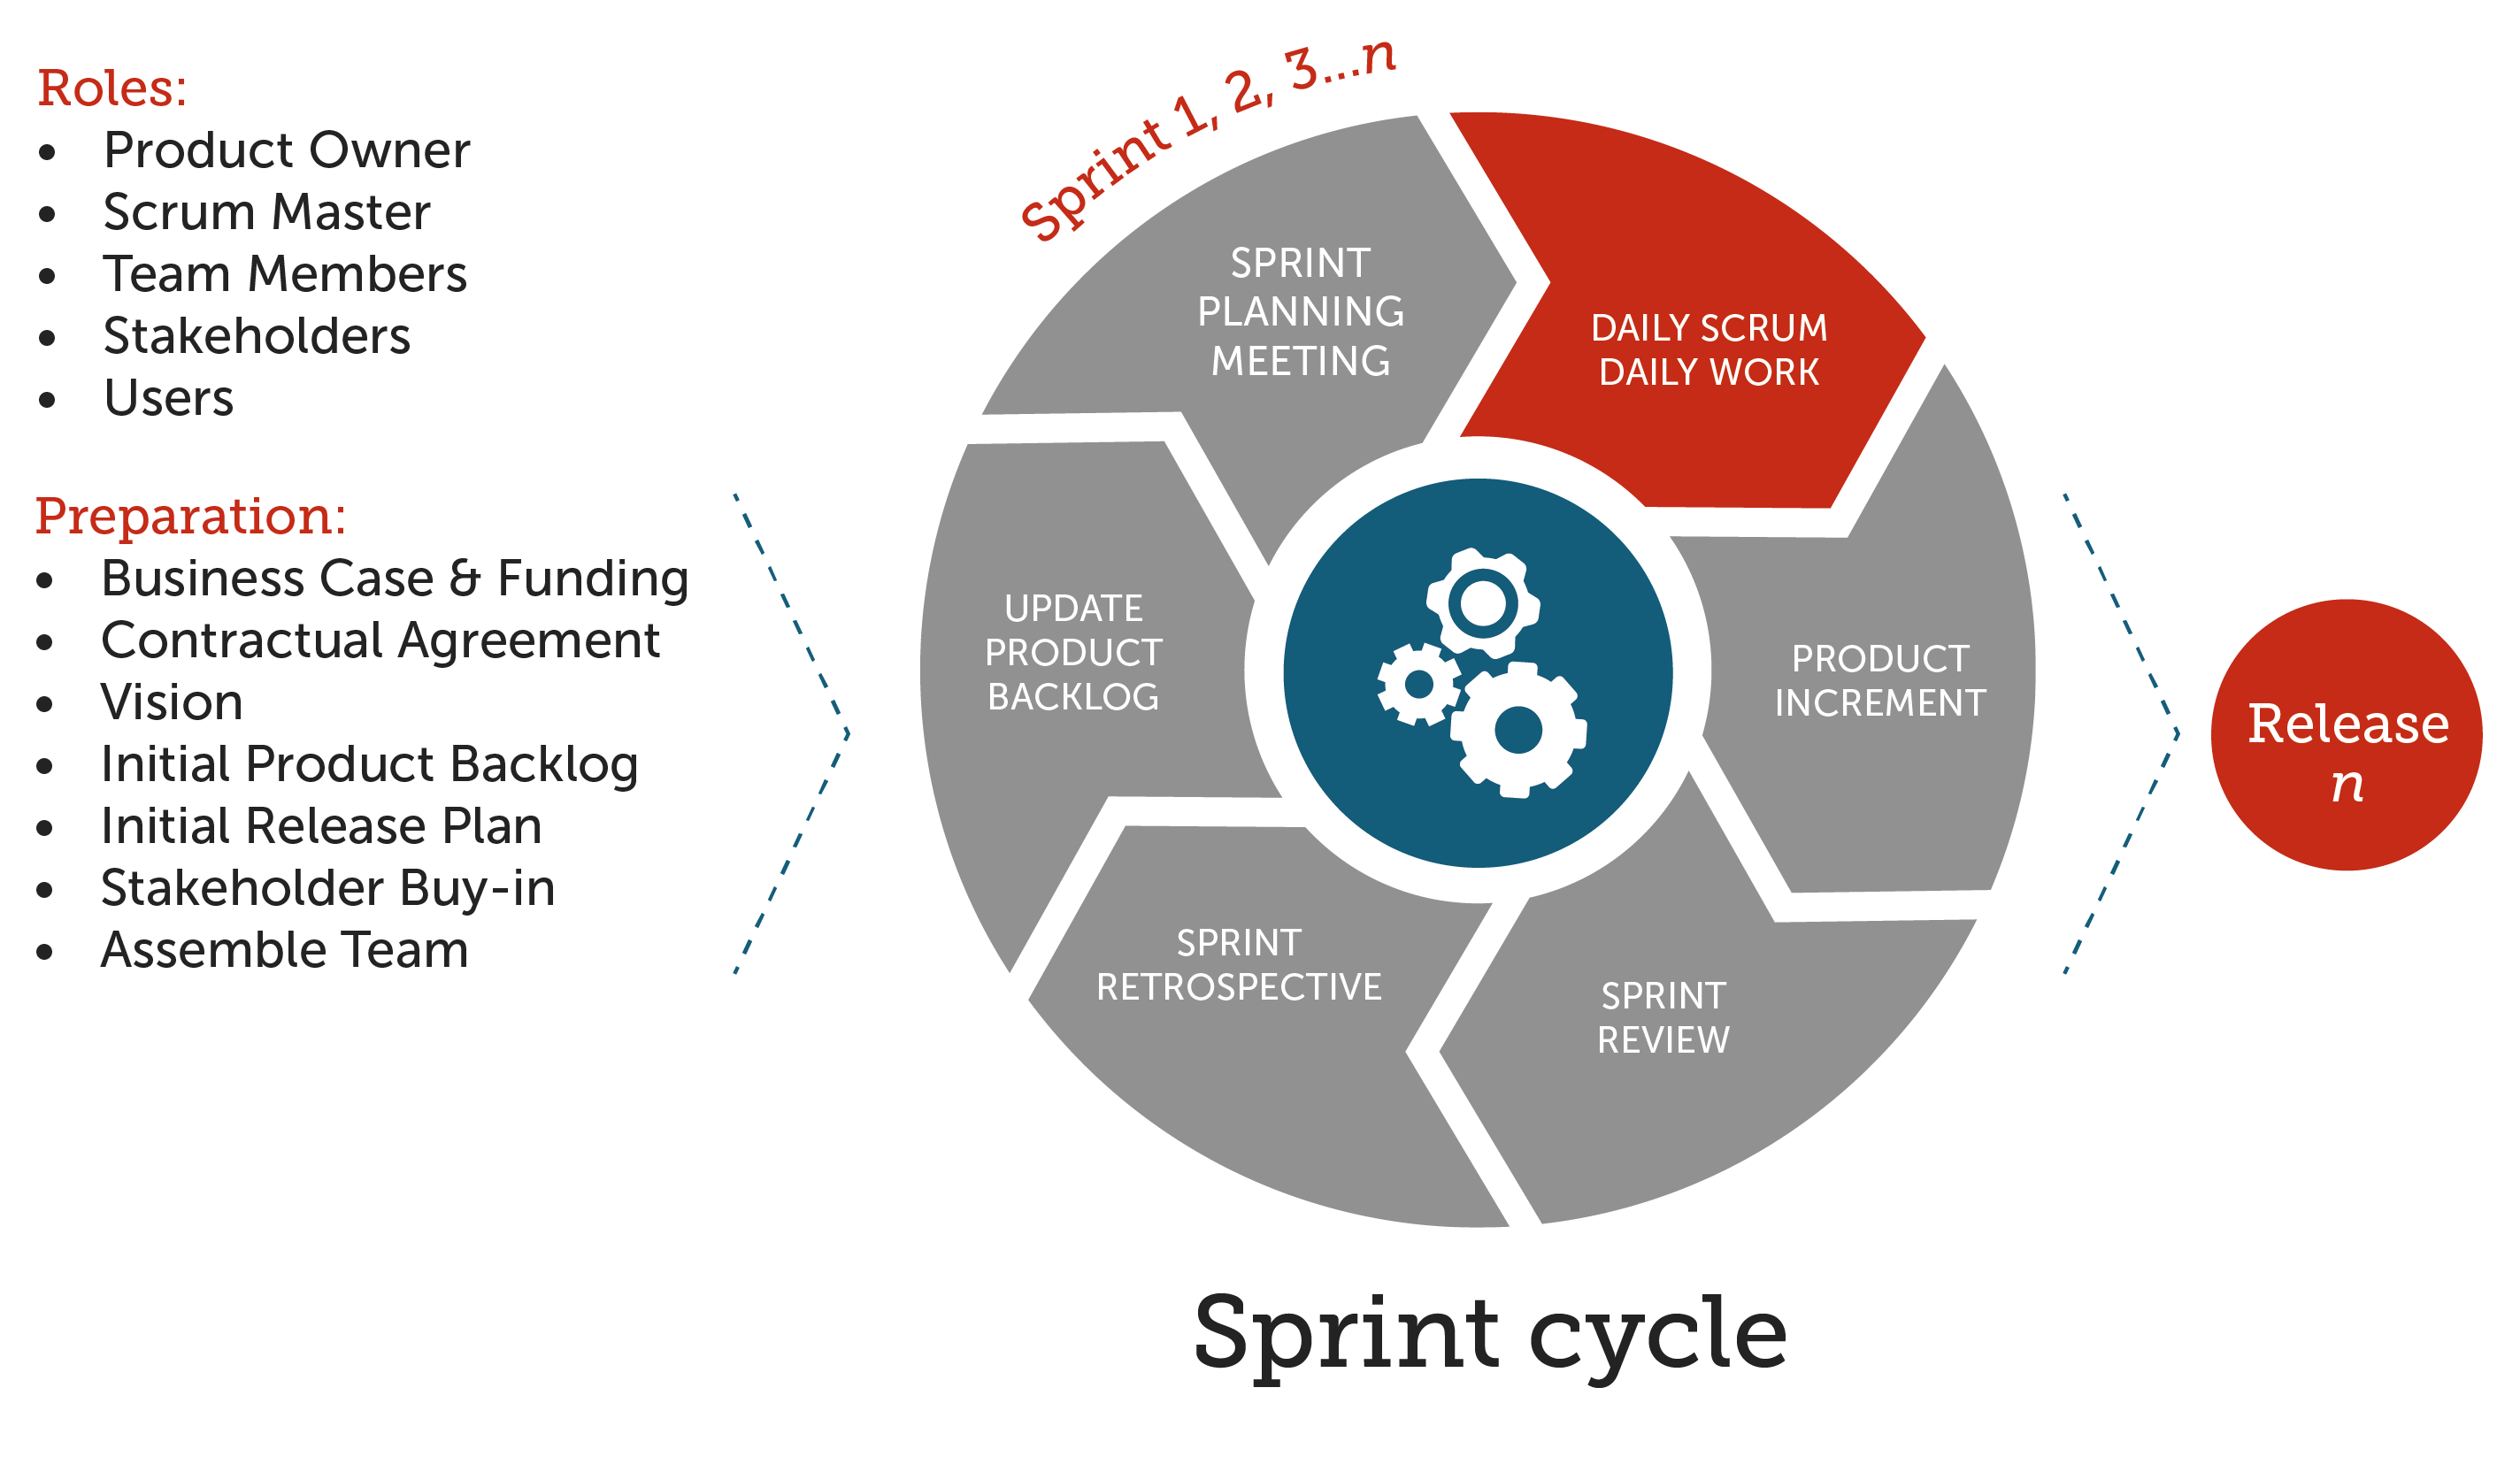 res/the-daily-scrum-in-the-sprint-cycle.png